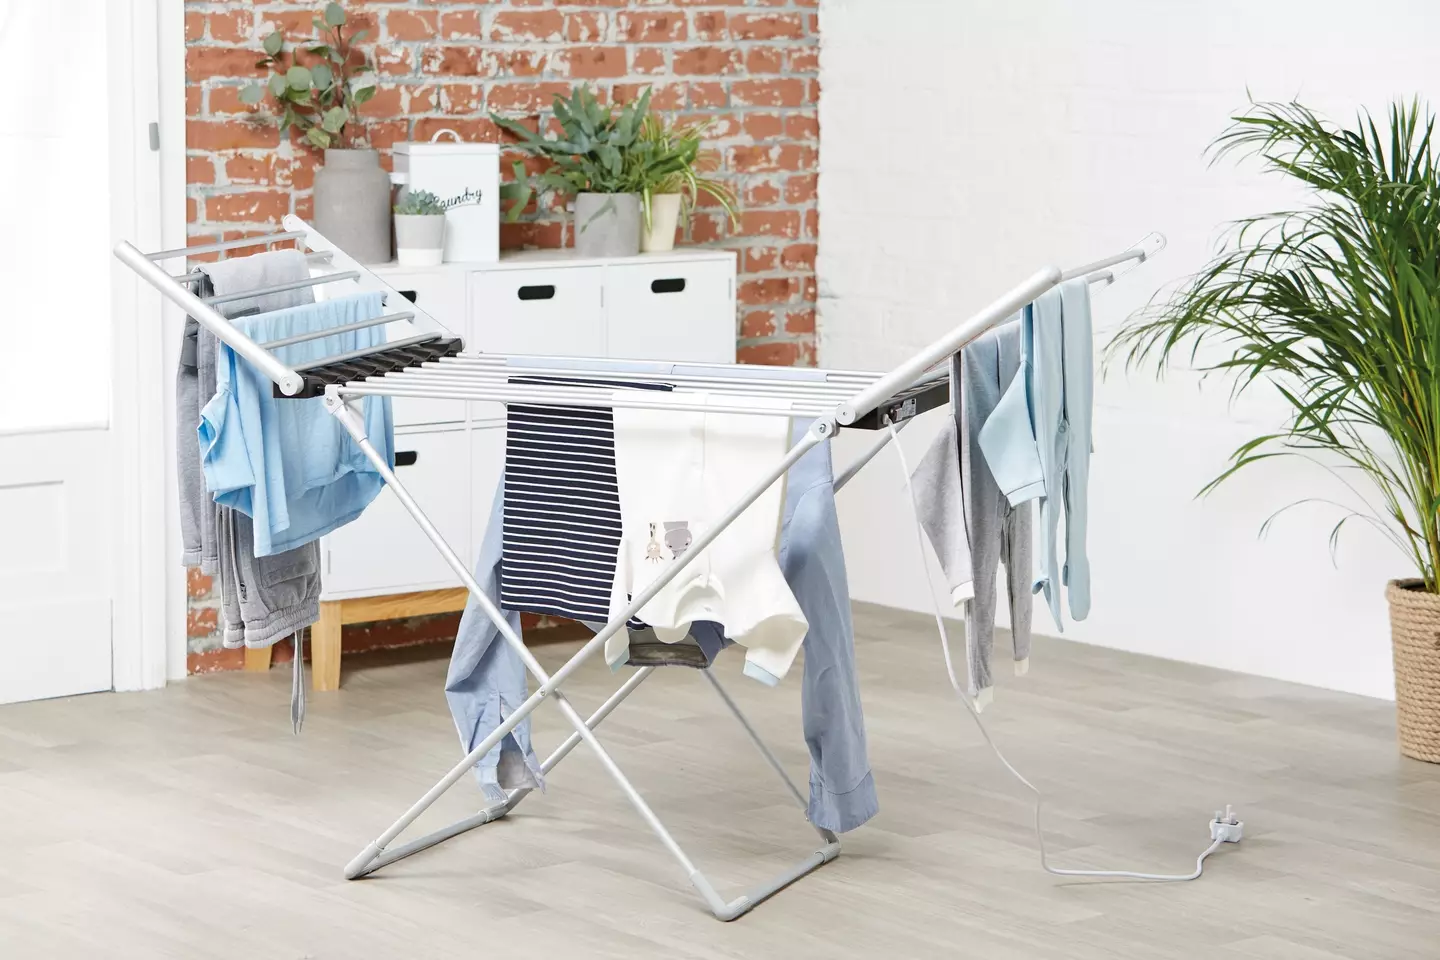 Aldi's heated airer is back (